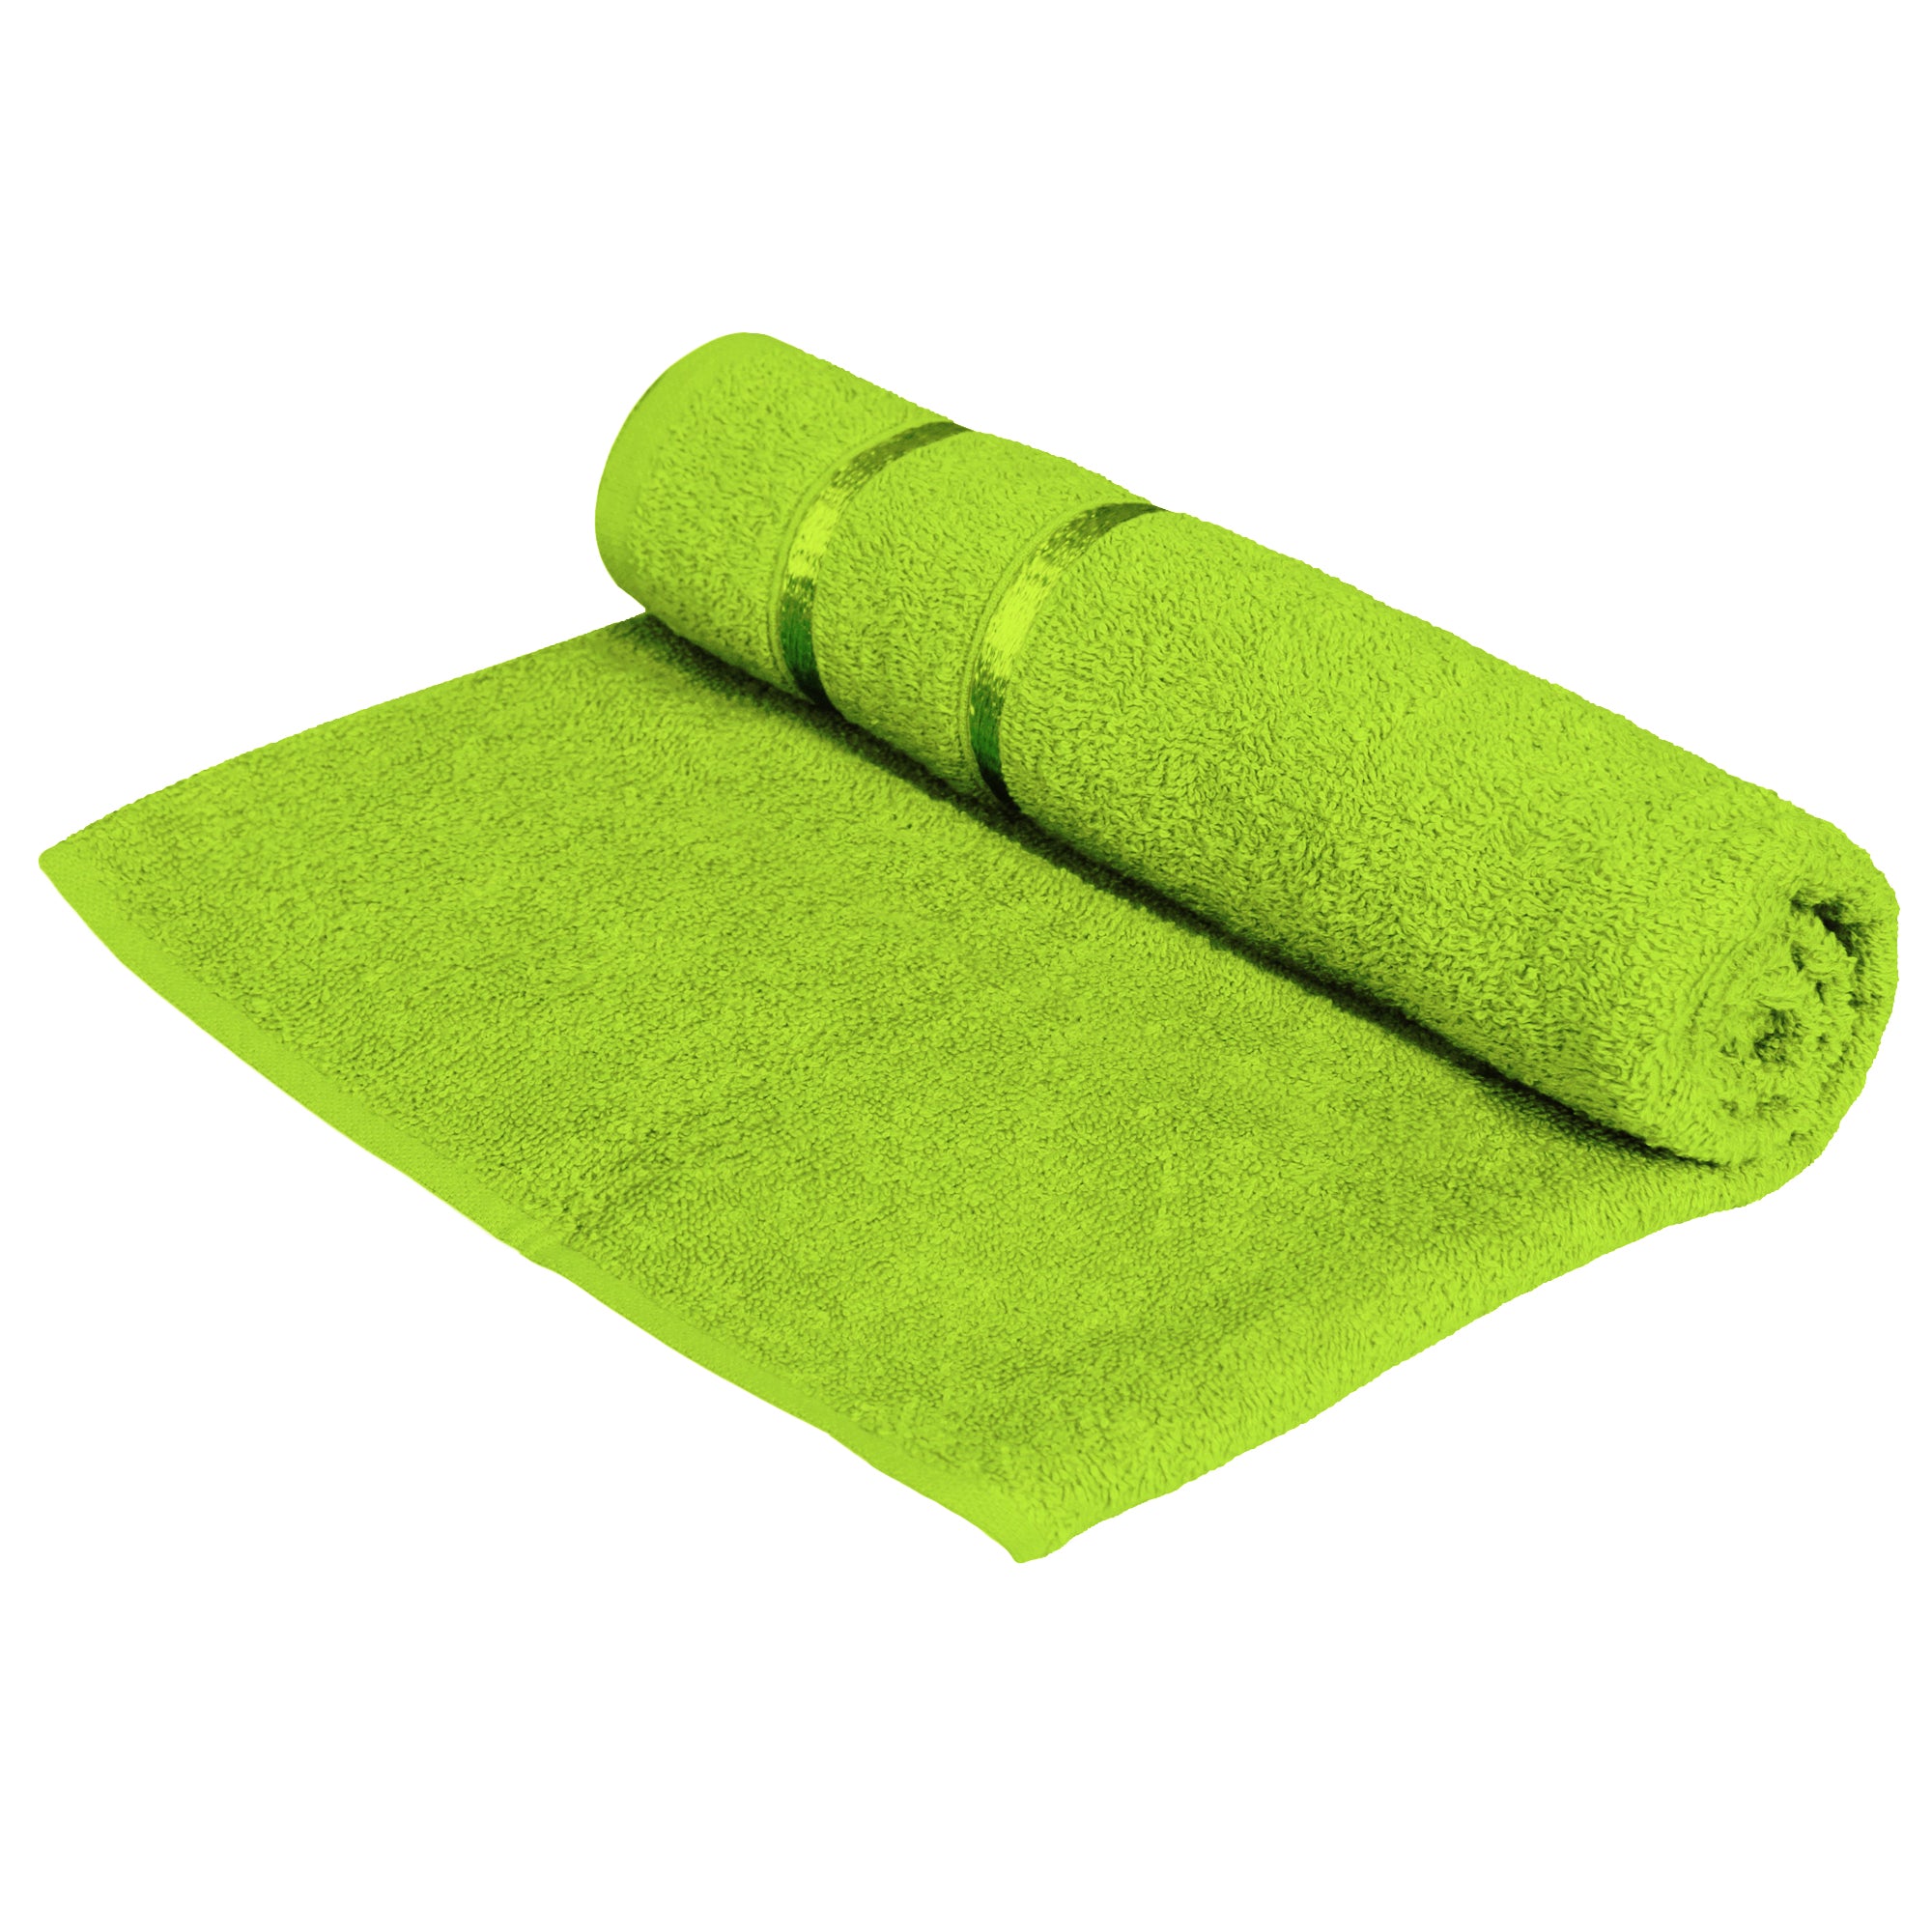 Story@Home 2 Units 100% Cotton Ladies Bath Towels - Green and Charcoal Grey